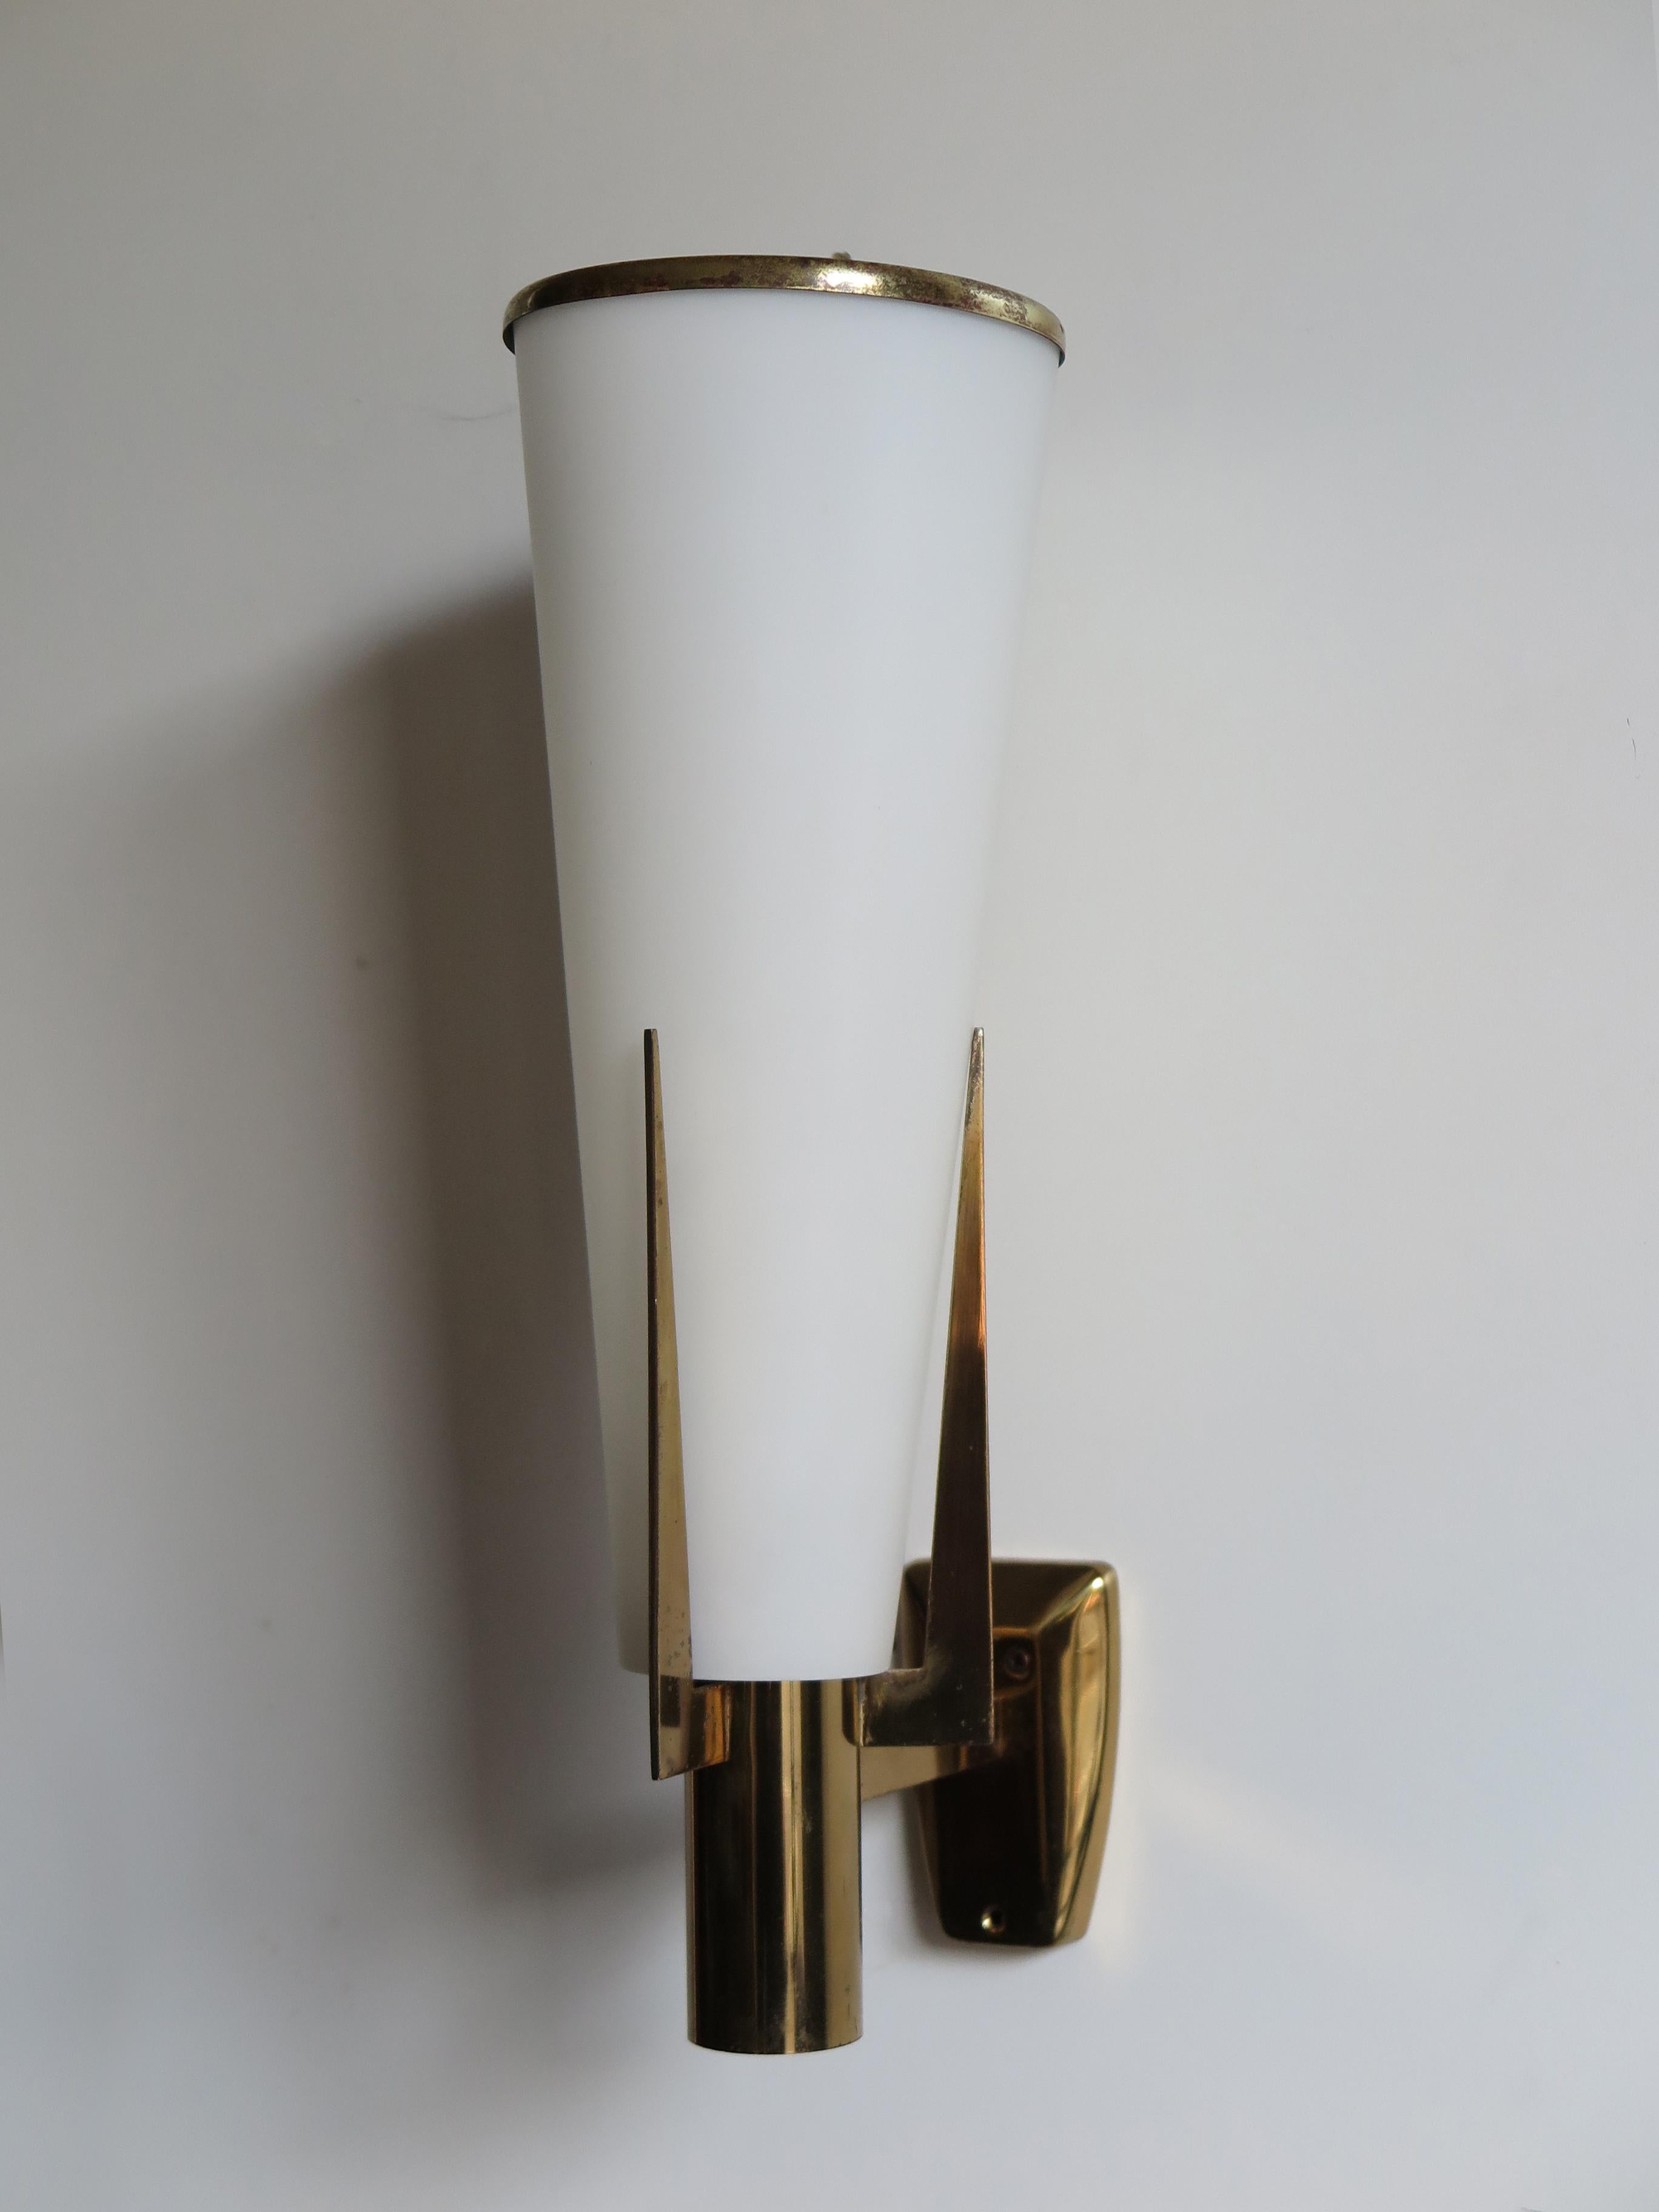 Italian big wall lamp sconce model “2021/1” produced by Stilnovo,
brass structure and satin glass diffuser, Stilnovo Italy engraved on the structure and original manufacturer label, 1960s.

Bibliography: Stilnovo production catalog n. 10, p.